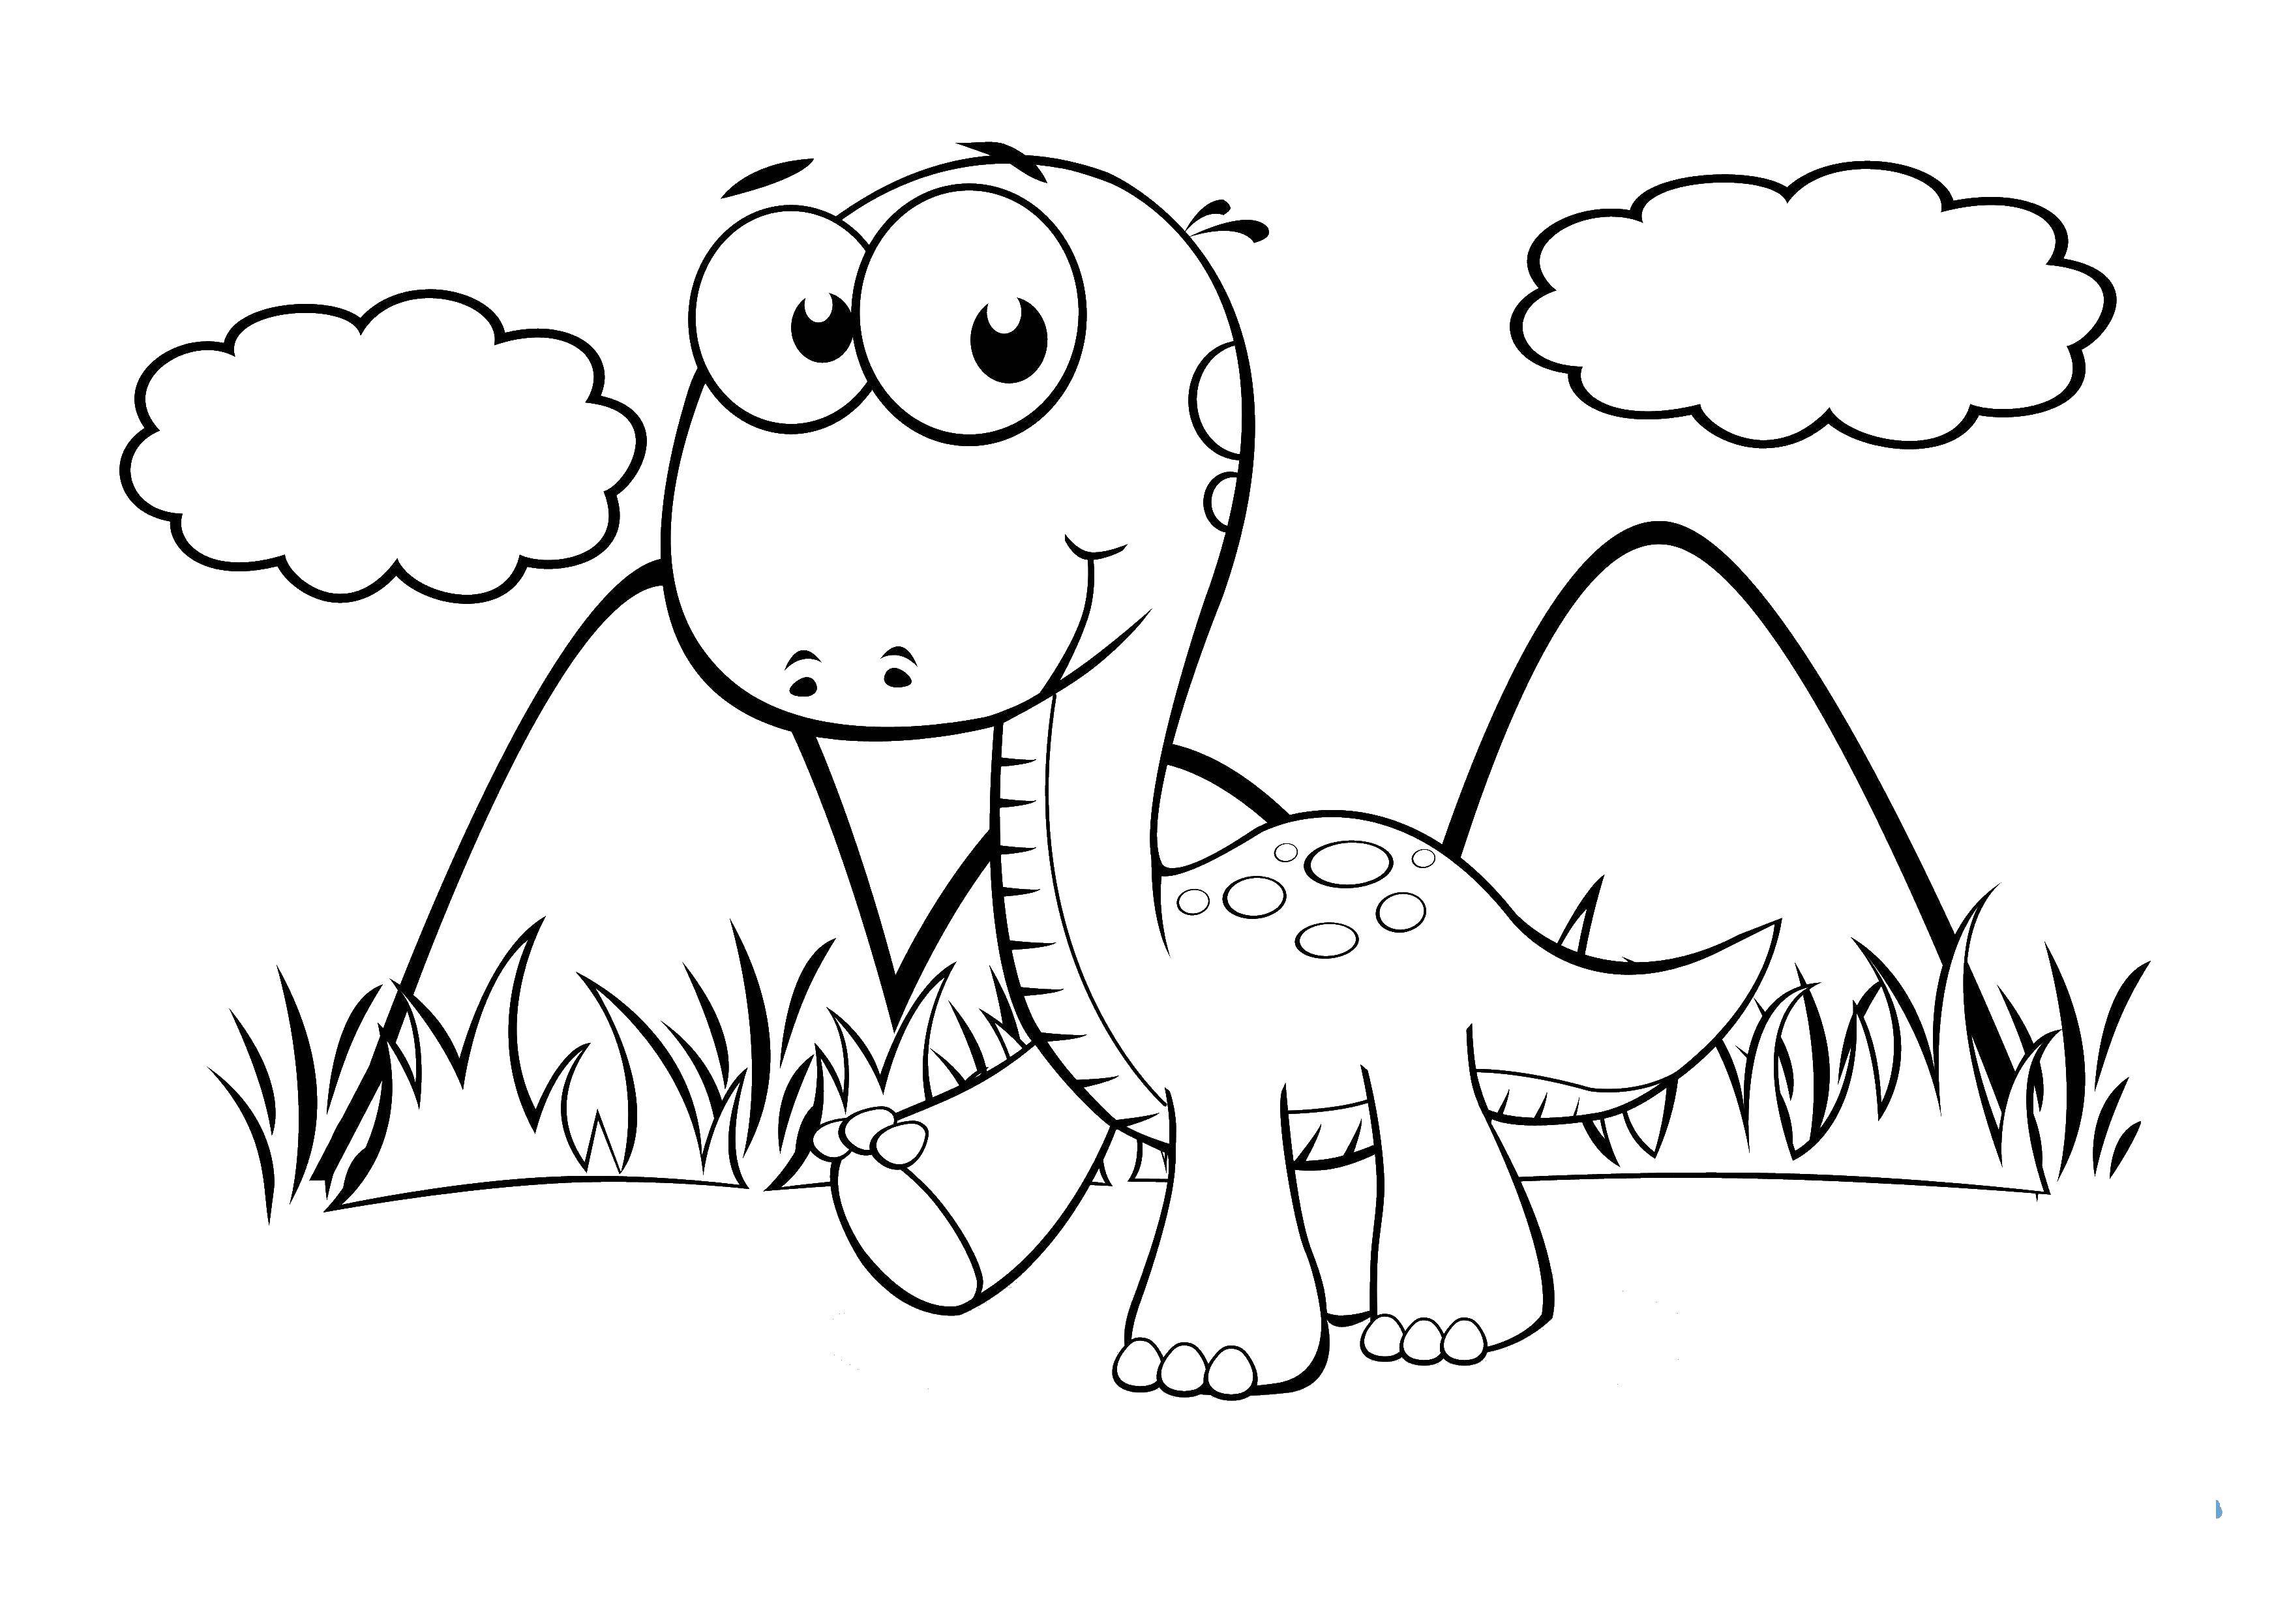 Coloring Dinosaur. Category Coloring pages for kids. Tags:  Dinosaur.